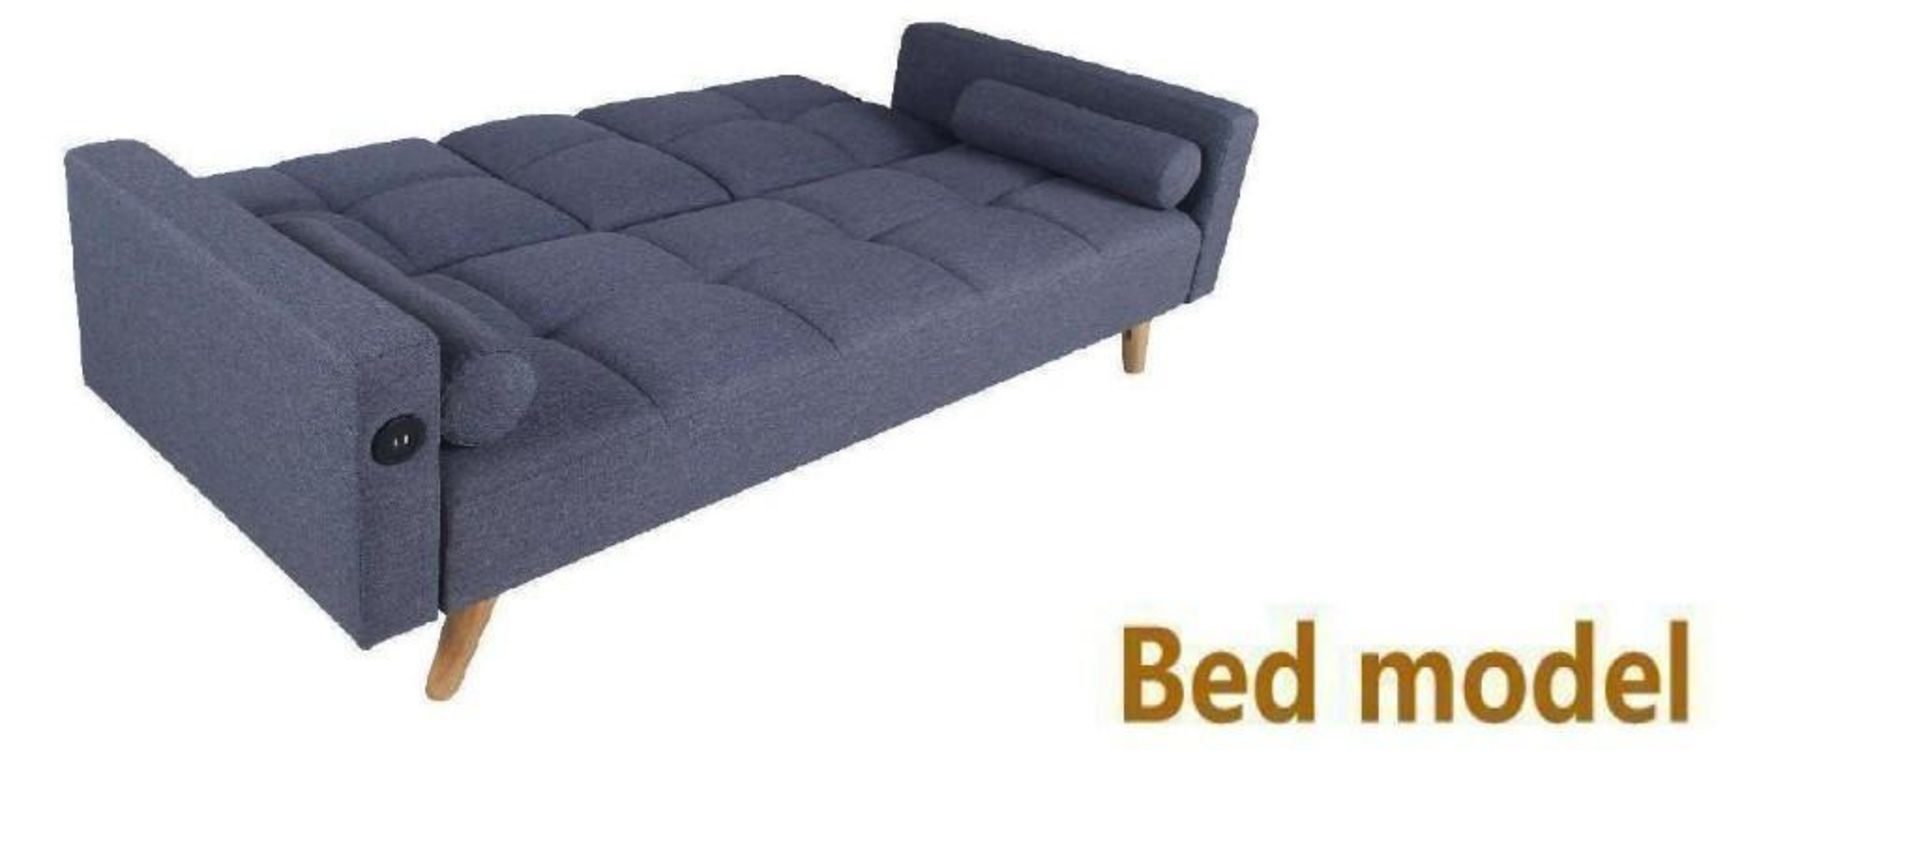 *BRAND NEW* Heavy Duty Clic Clac sofa bed with 2 bolsters, dual usb & charger socket. - Image 7 of 11